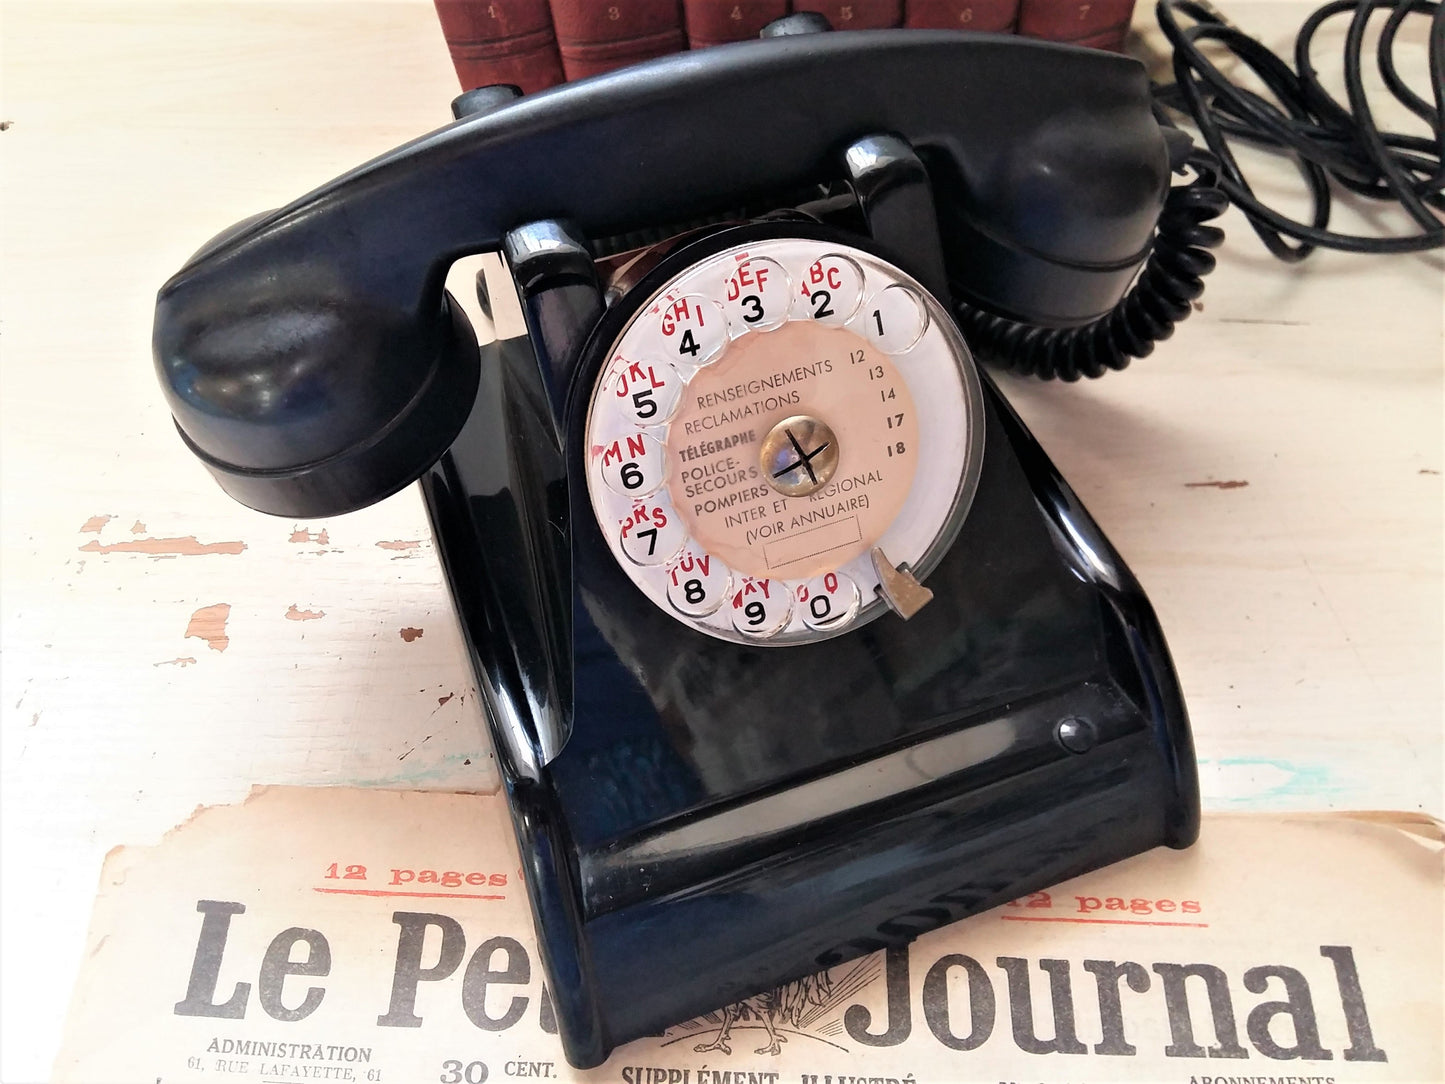 1960s Black Bakelite Dial Telephone. from Tiggy & Pip - €149.00! Shop now at Tiggy and Pip